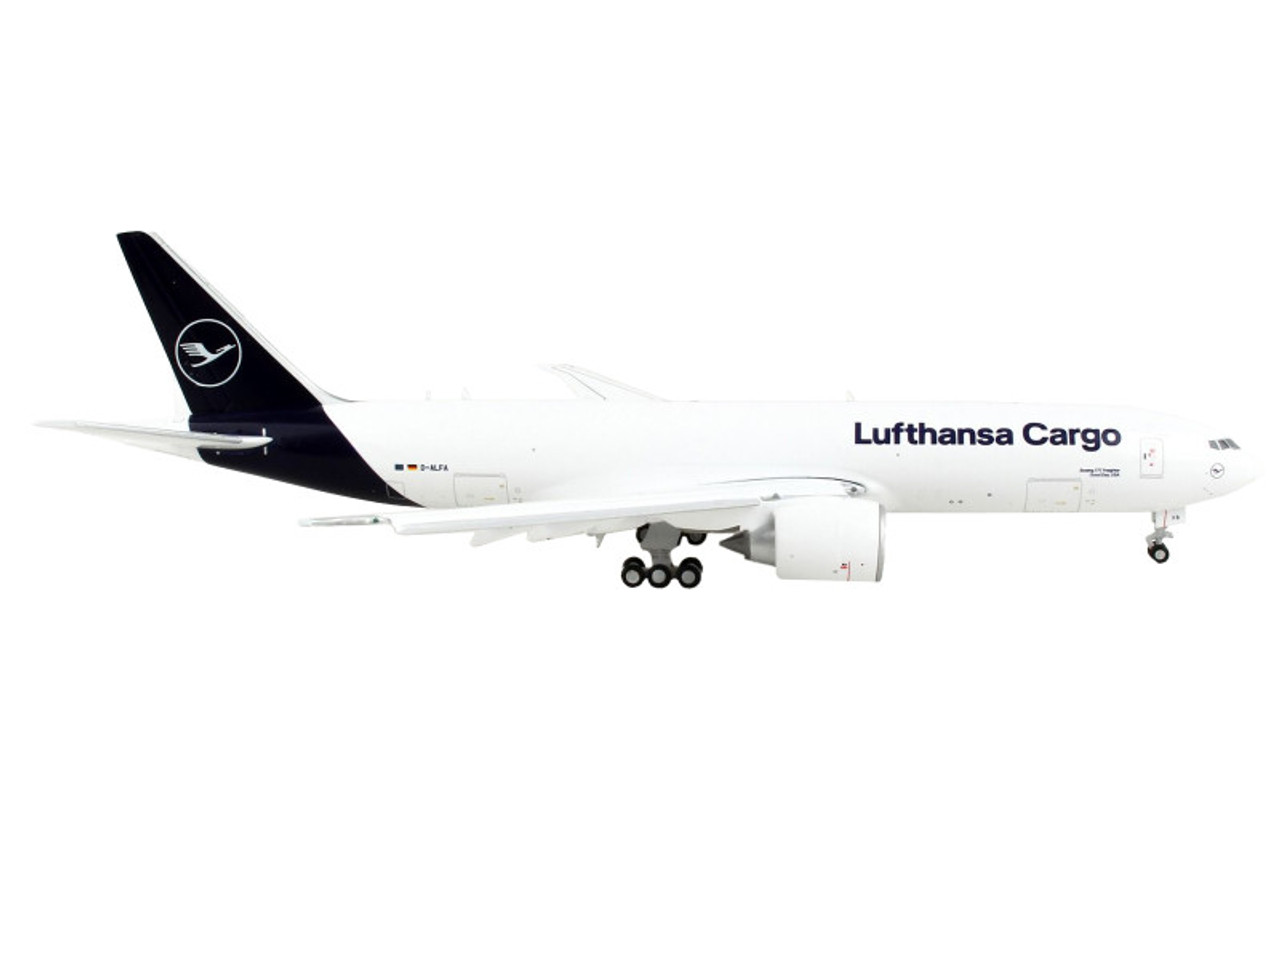 Boeing 777F Commercial Aircraft with Flaps Down "Lufthansa Cargo" White with Dark Blue Tail 1/400 Diecast Model Airplane by GeminiJets